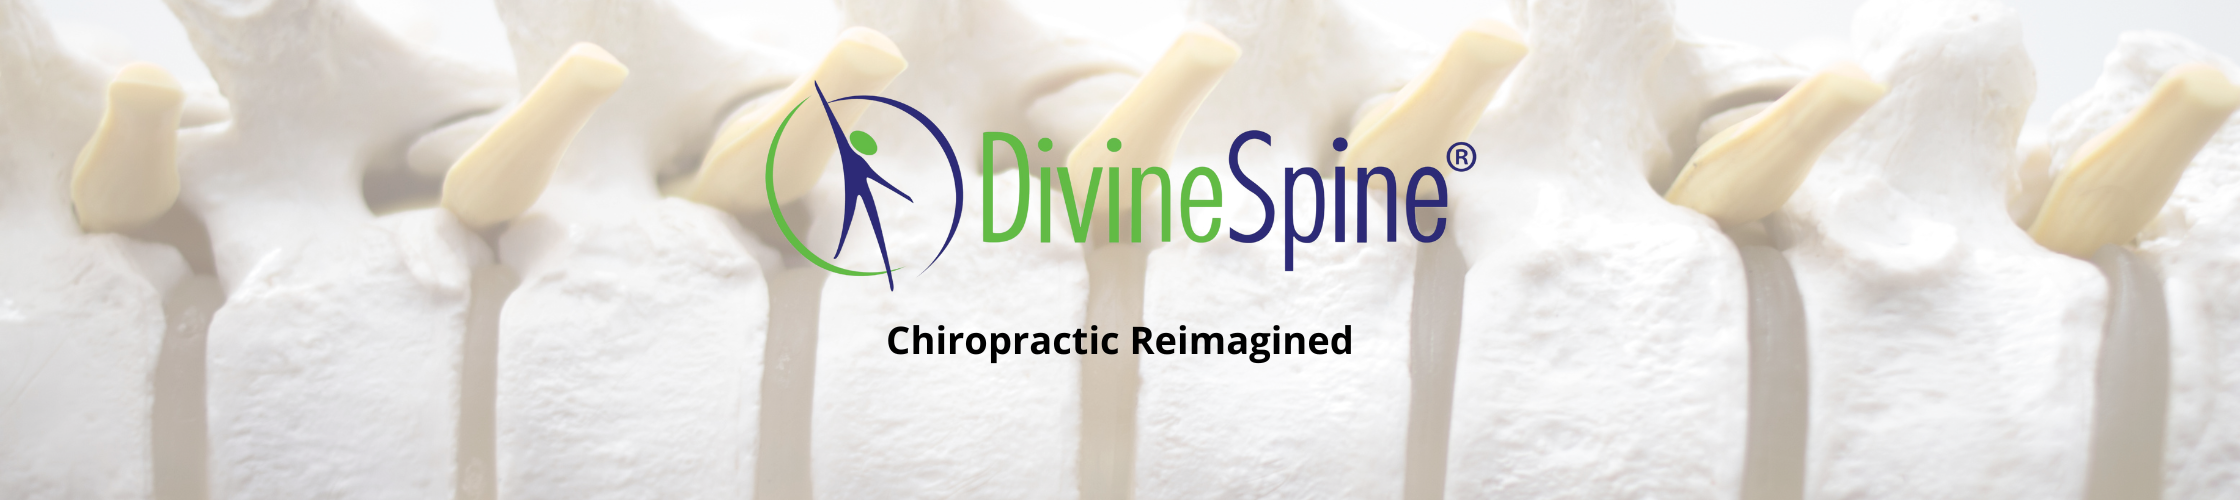 Divine spine chiropractic reimagined image with spine 